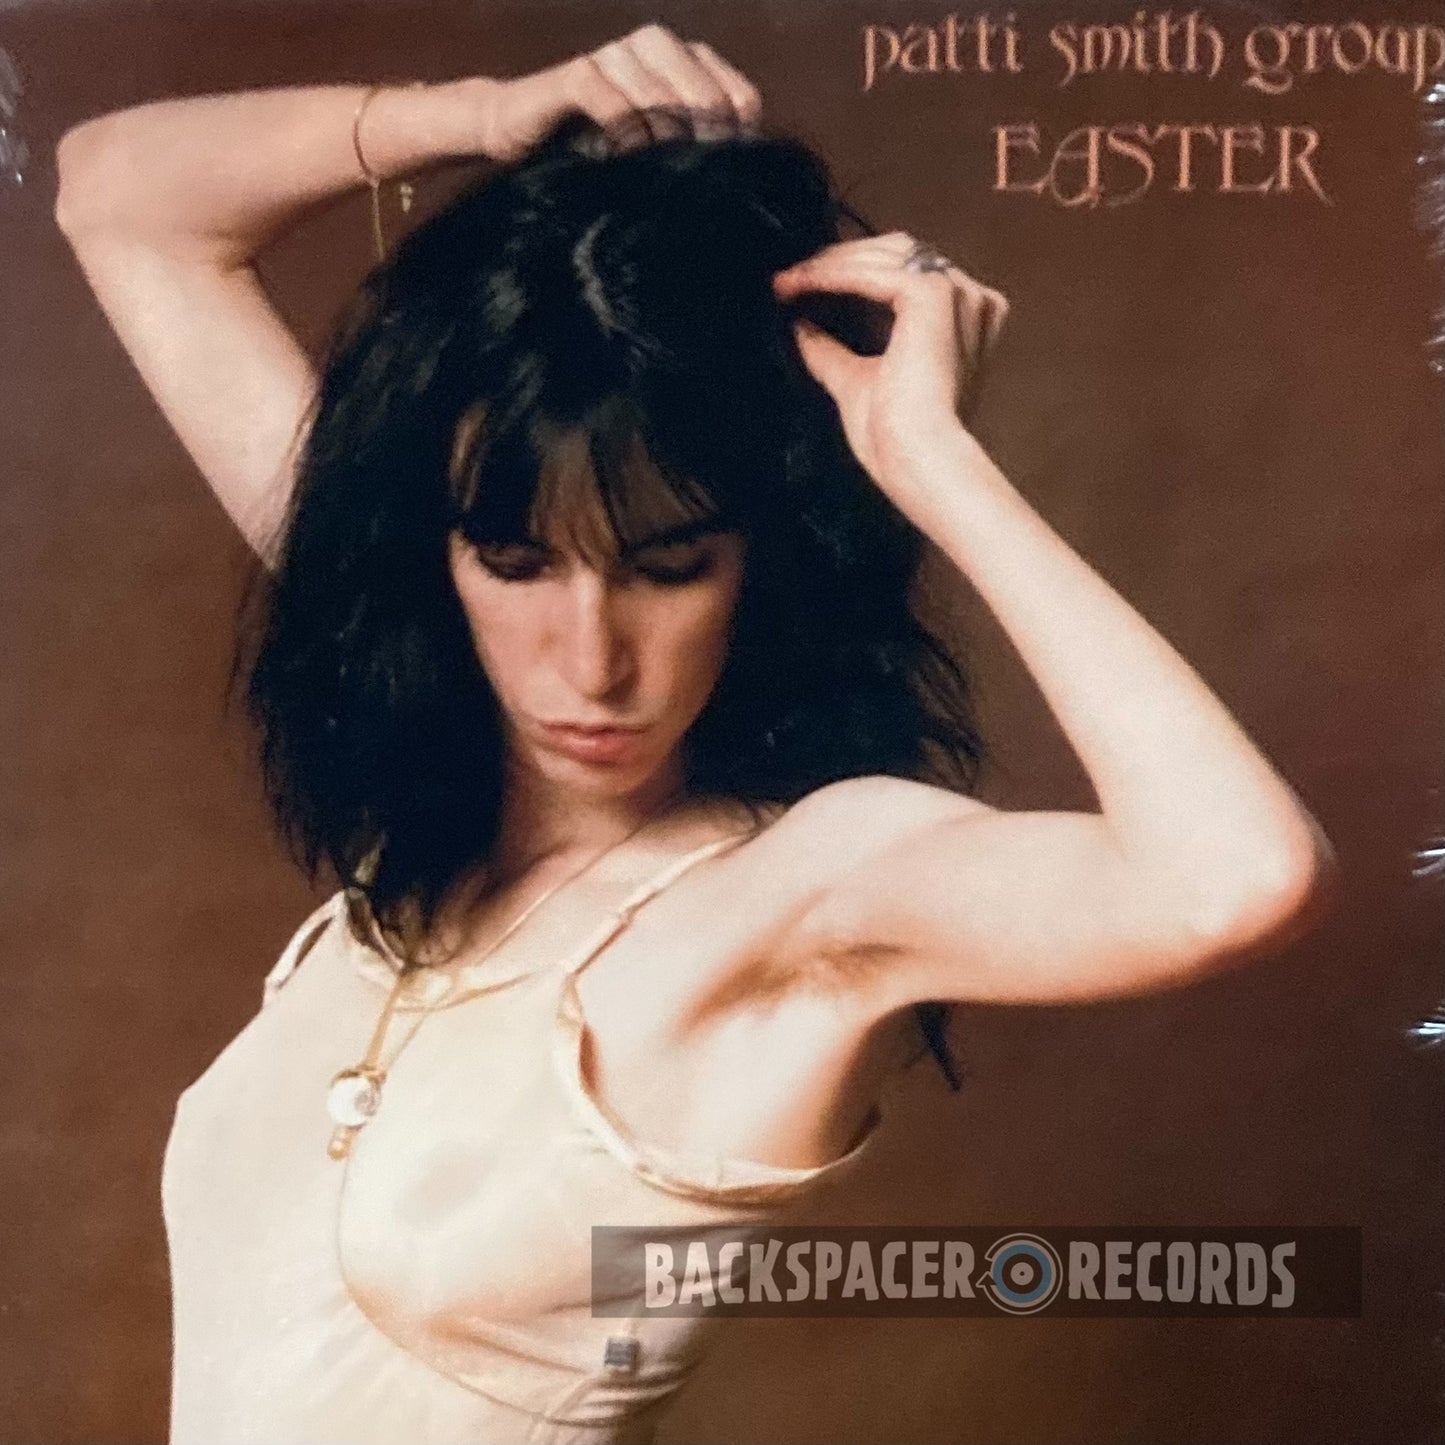 Patti Smith Group – Easter LP (Sealed)